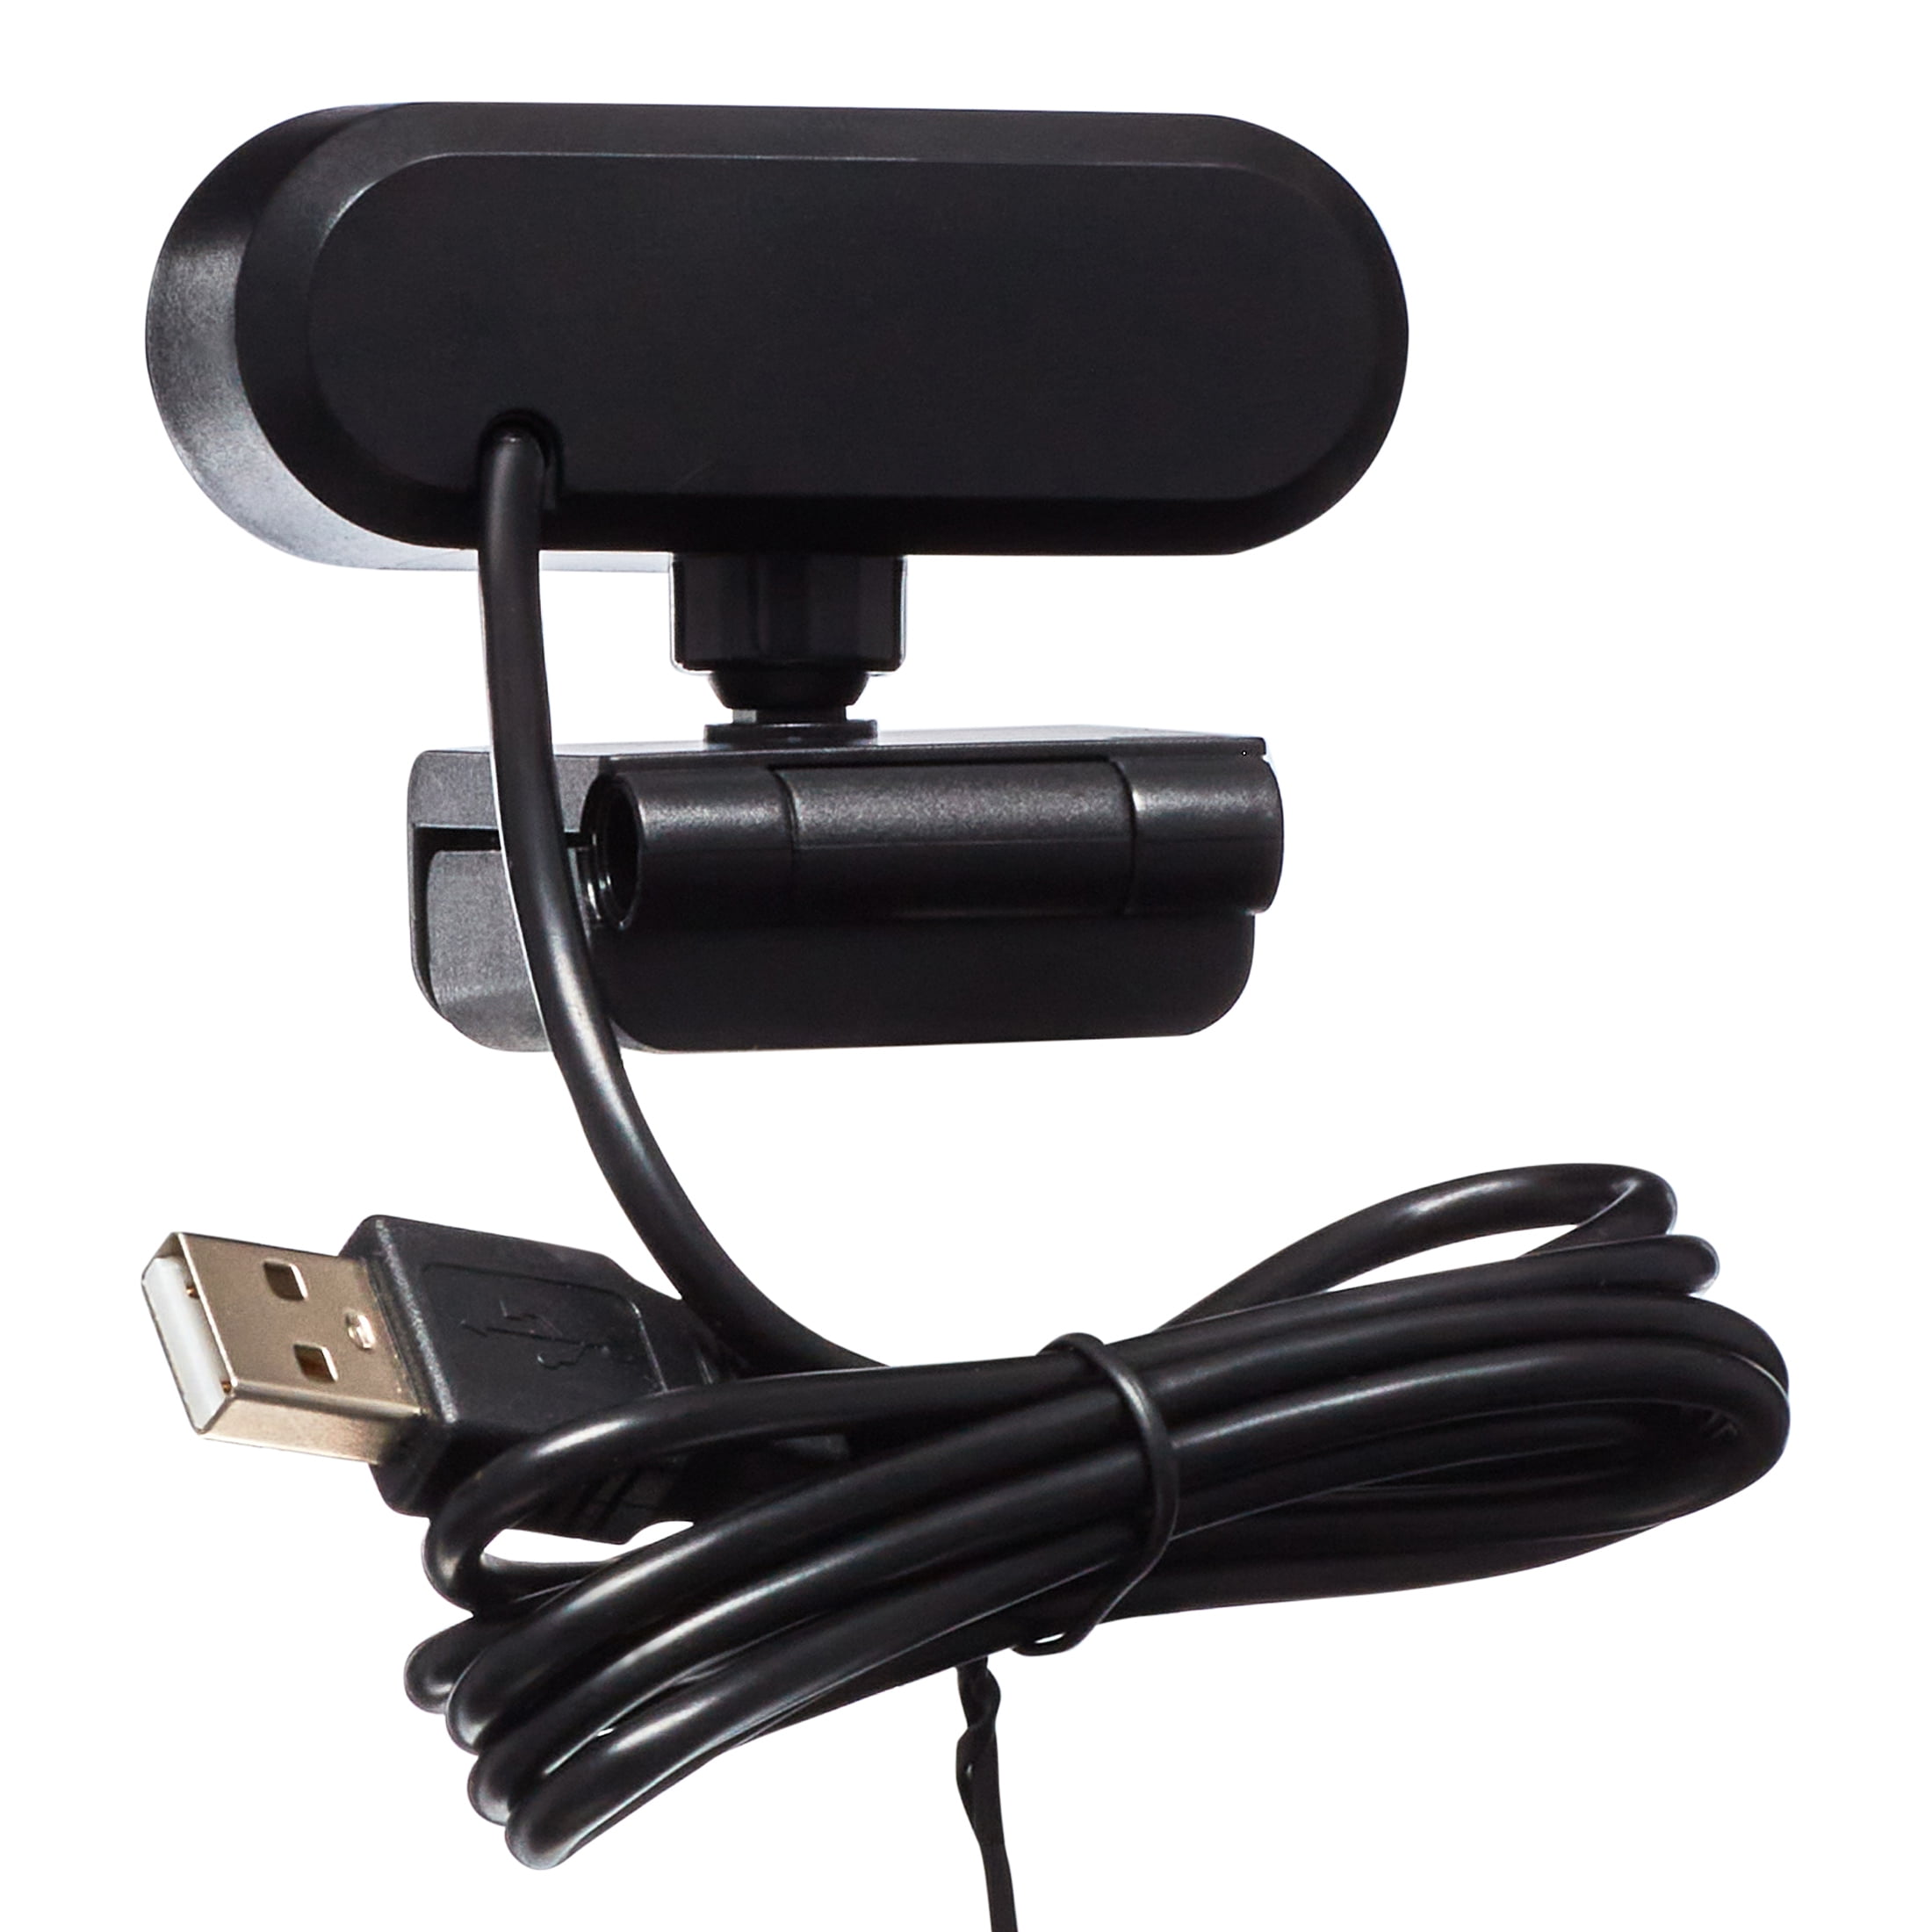 Webcam With Microph, Webcam Streaming Computer Web Camera For Video Calling  Conferencing Recording, Usb Webcams,30 Fps